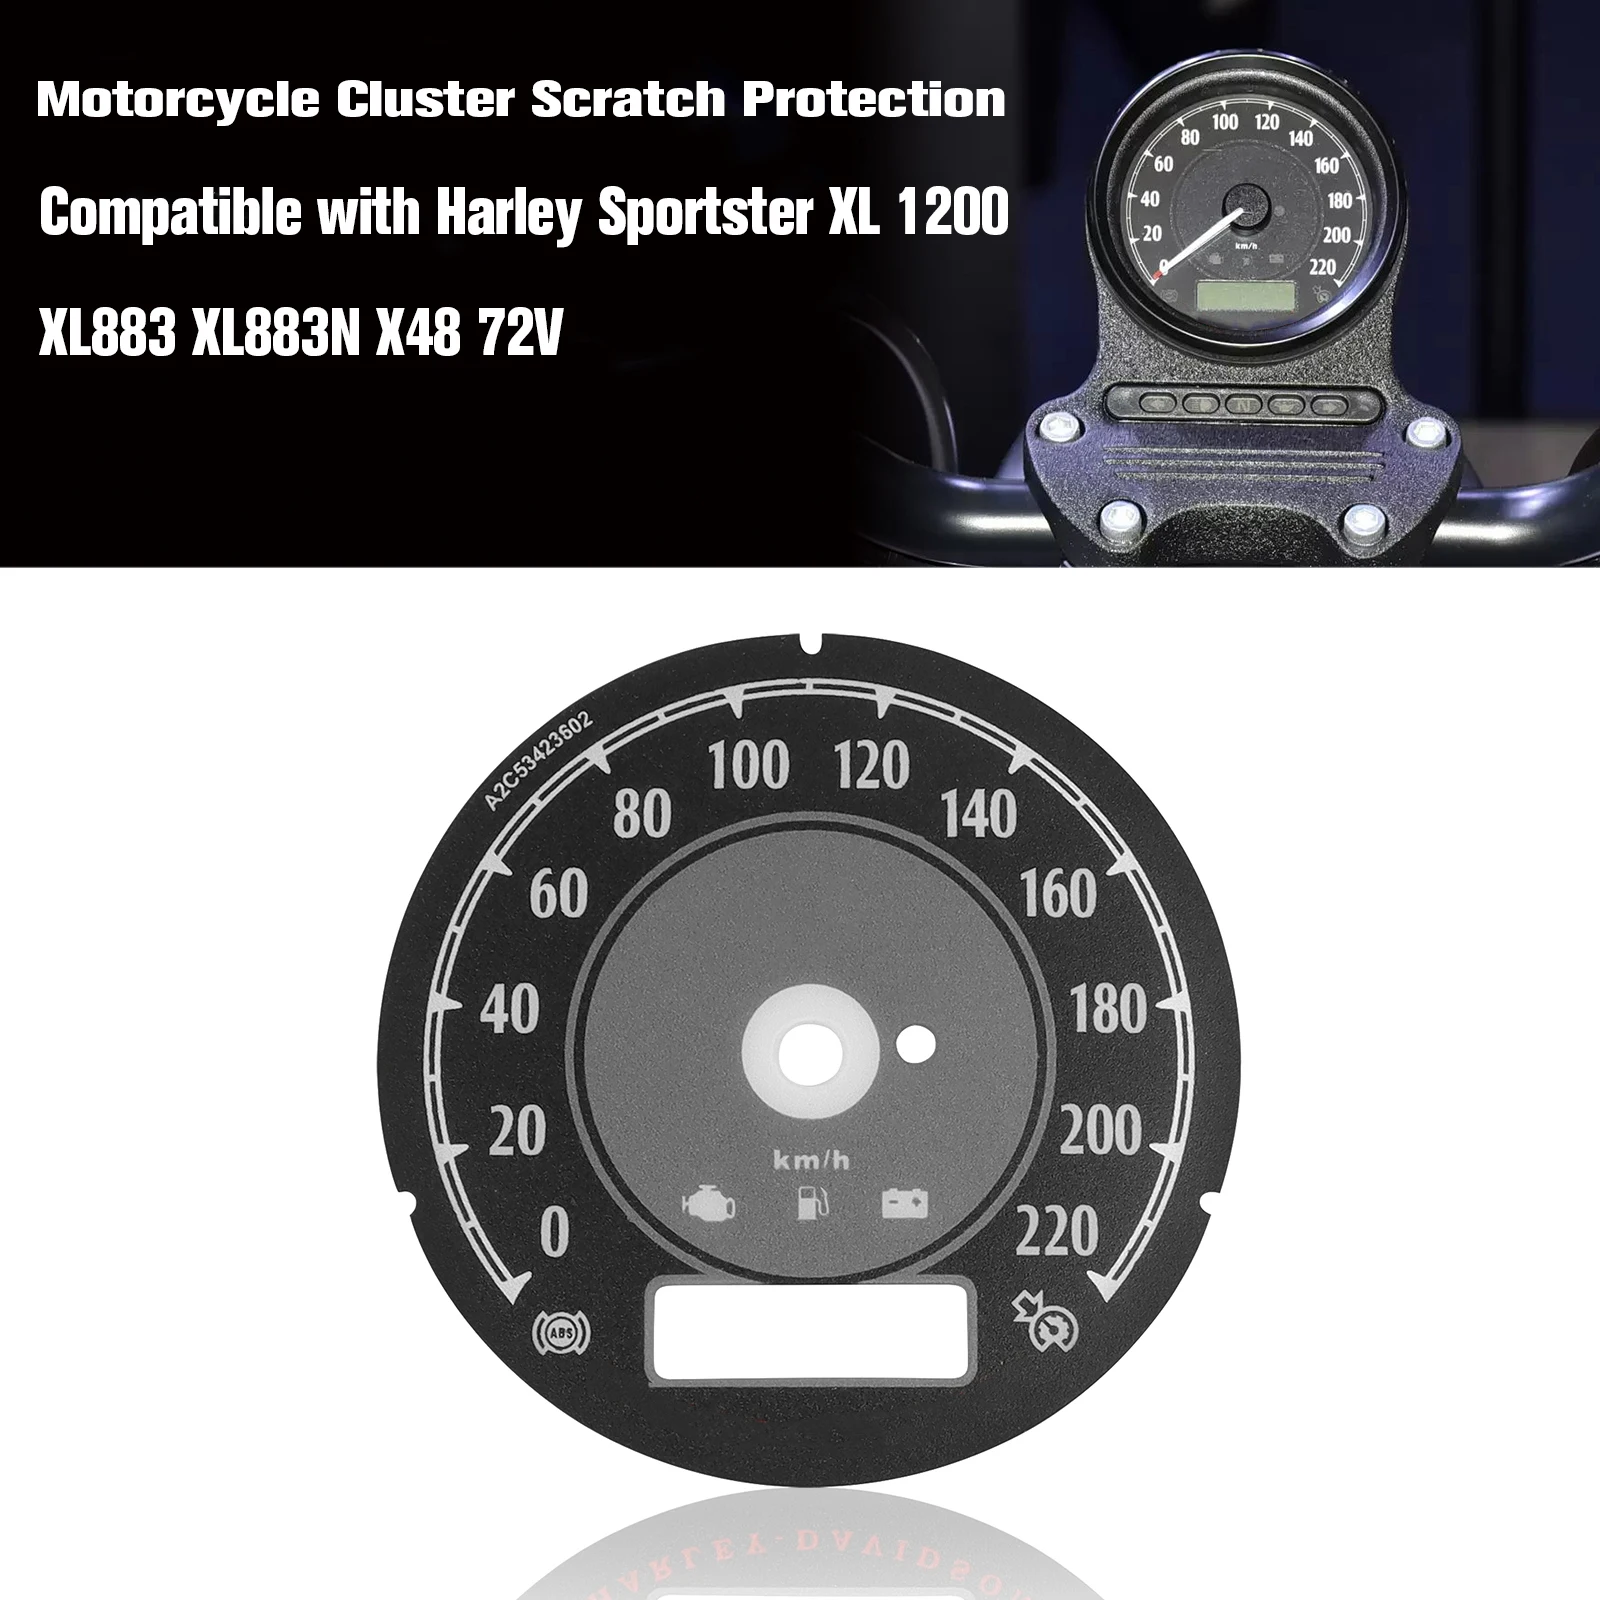 

Compatible with Harley Sportster XL 1200 XL883 XL1200 XL883N X48 72 Speedometer Scratch Cluster Screen Protection Film Protector